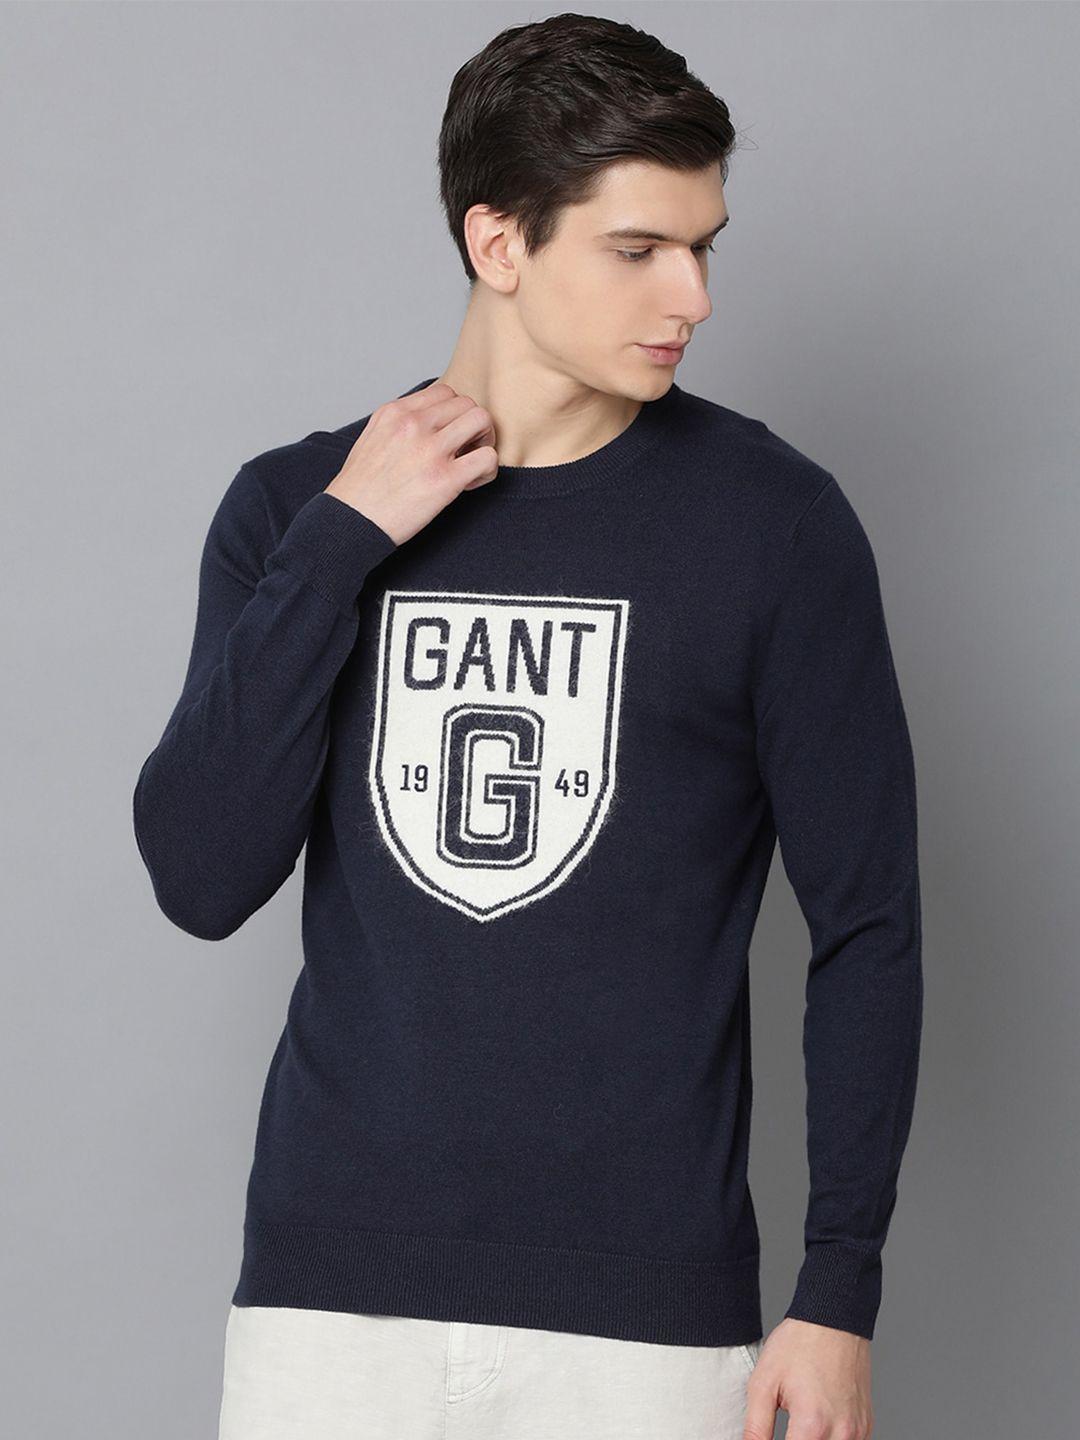 gant-men-assorted-printed-cotton-pullover-sweater